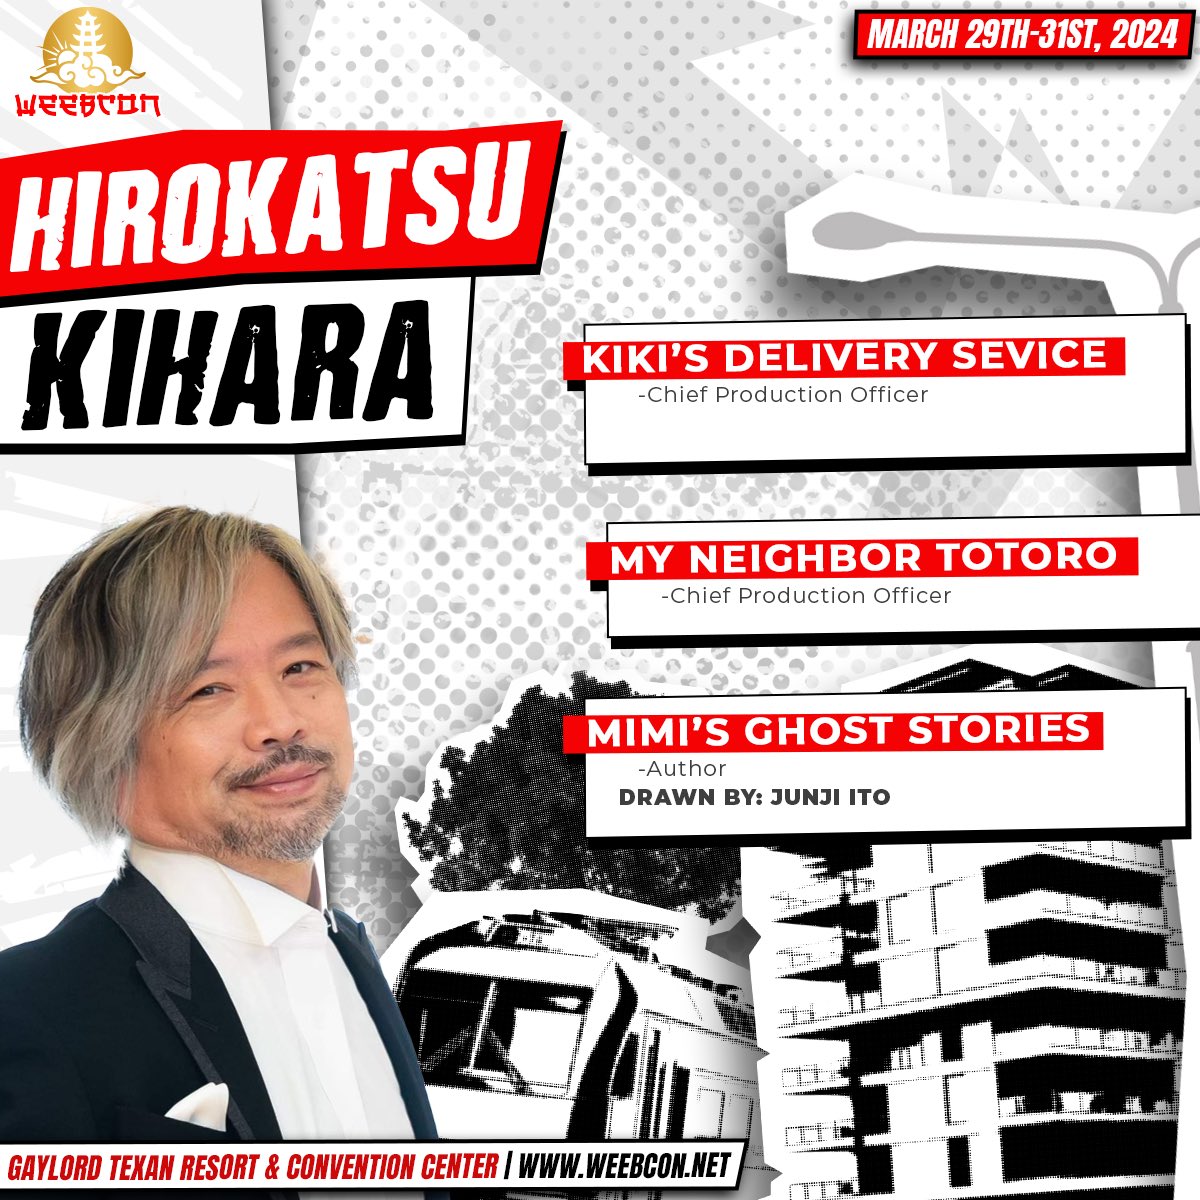 ⛅️JAPANESE CELEBRITY GUEST⛅️ WeebCon is honored to welcome back the prestigious Hirokatsu Kihara! We have some cool panels planned to honor the 35th anniversary of Kiki’s Delivery Service, so don’t miss out! See you at WeebCon ⛅️